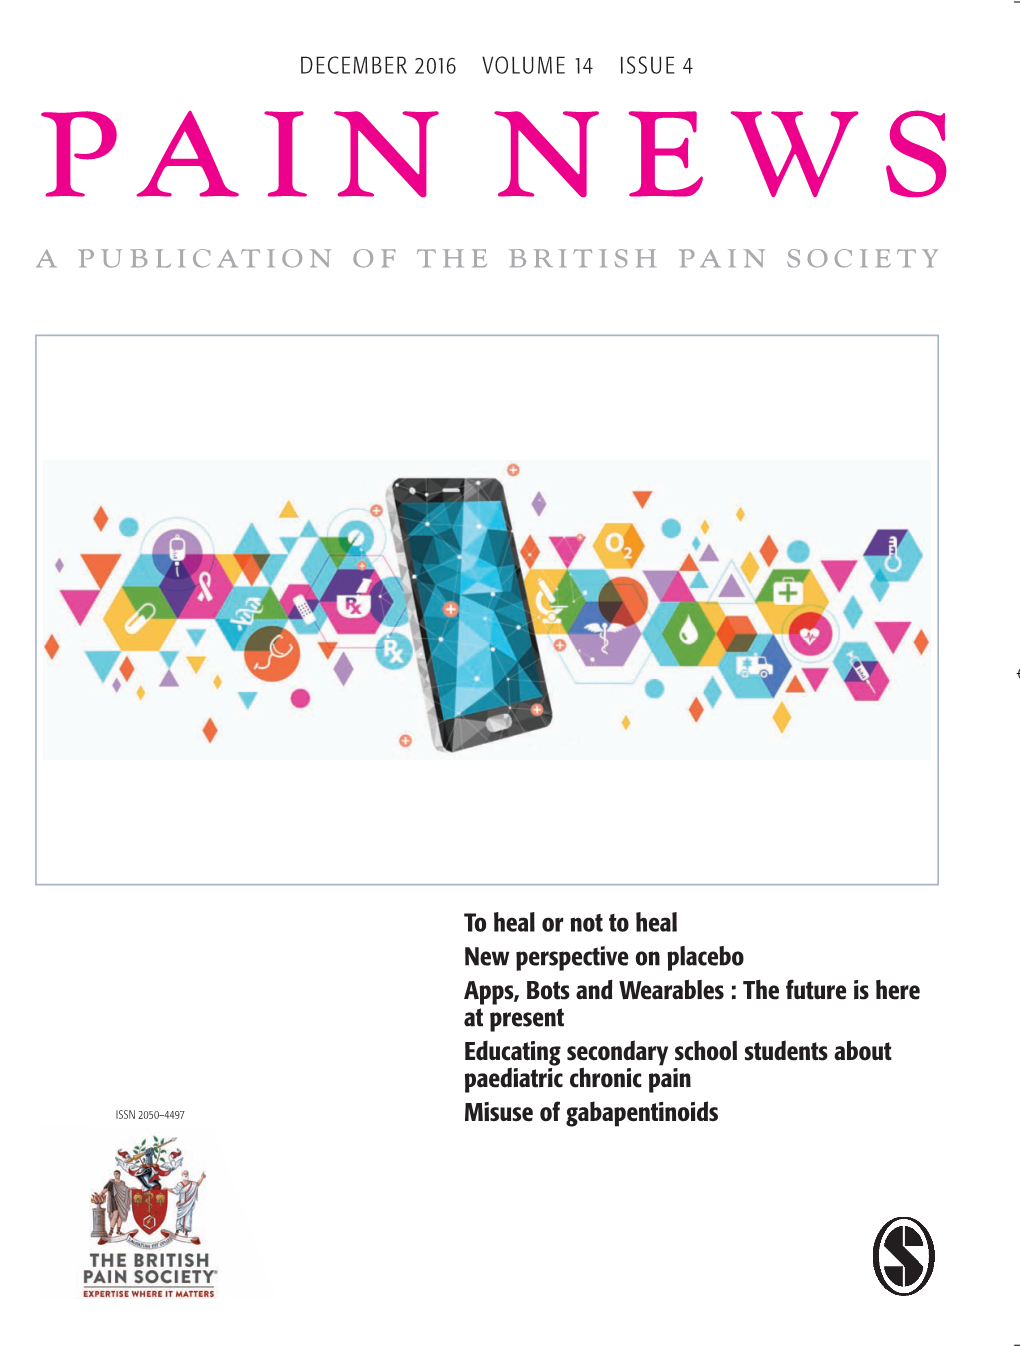 A Publication of the British Pain Society